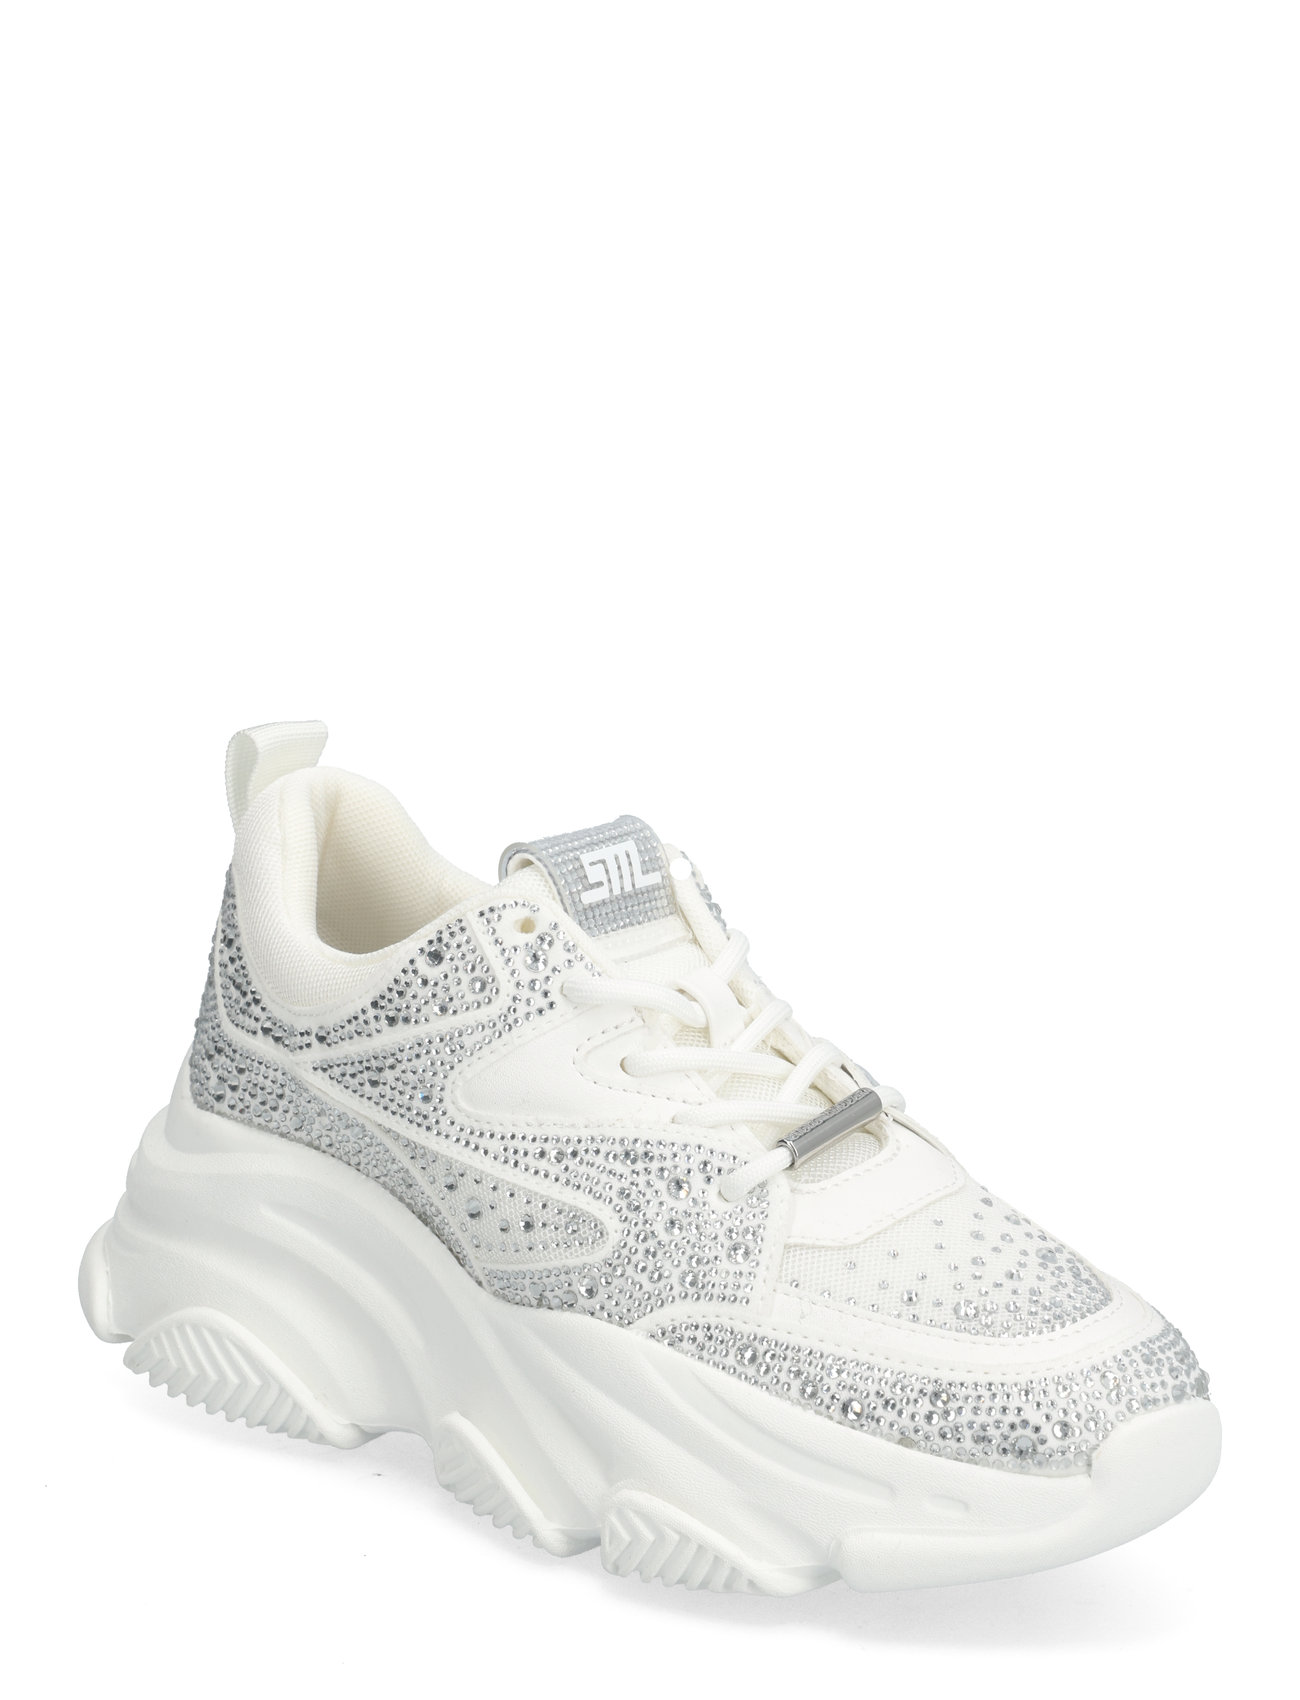 Privy Sneaker Shoes Sneakers Chunky Sneakers White Steve Madden